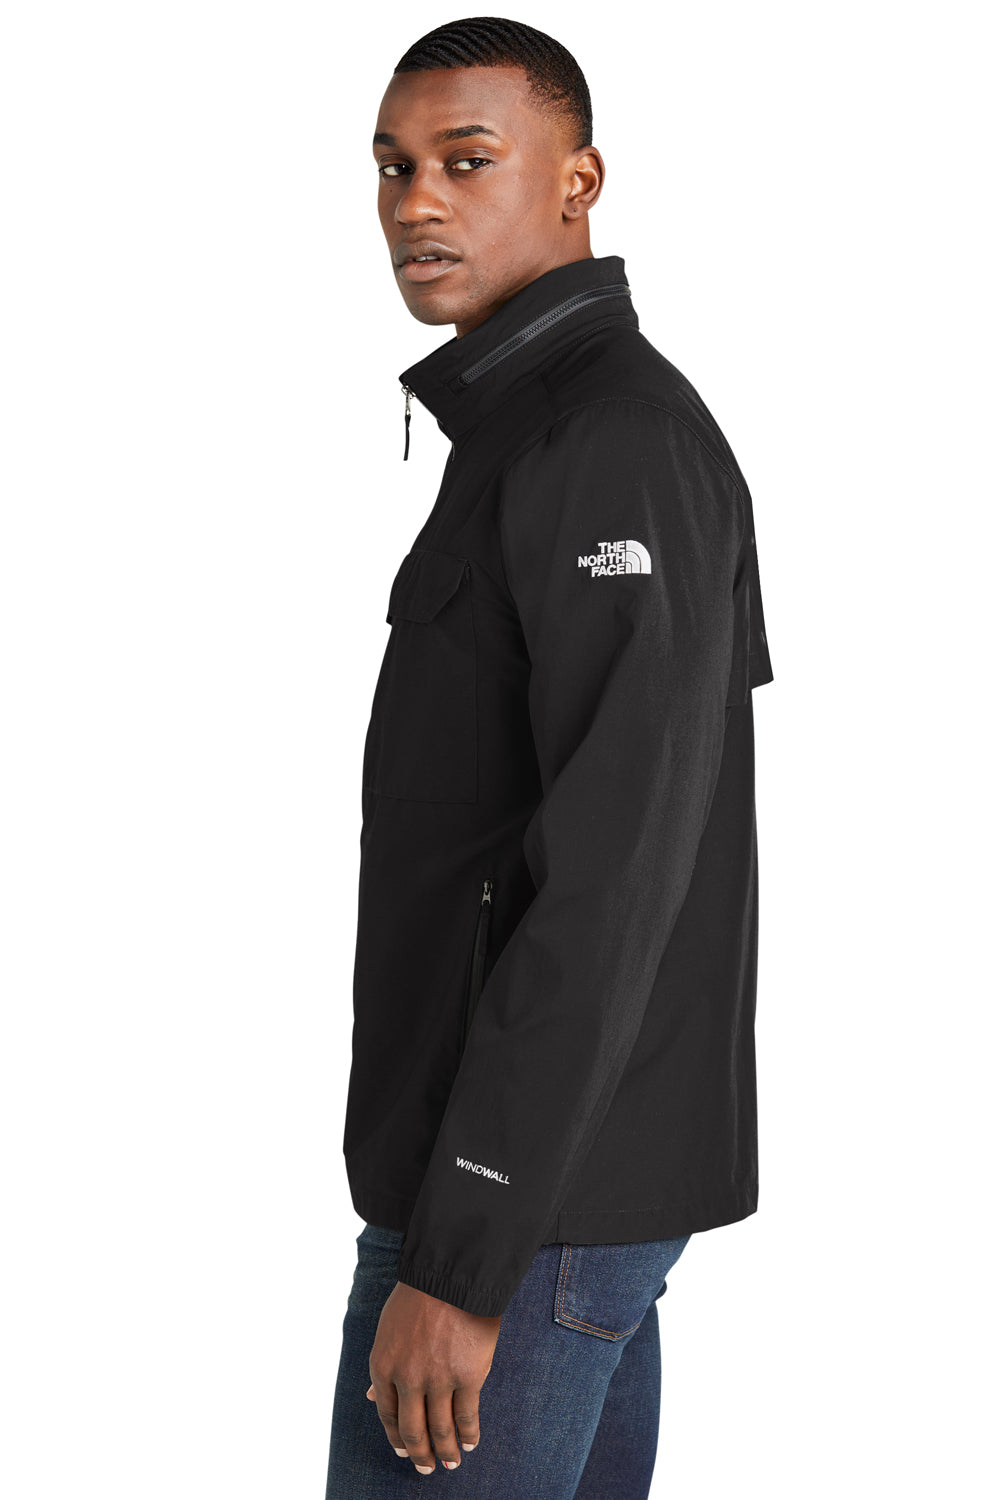 The North Face NF0A5ISG Packable Travel Full Zip Jacket Black Side